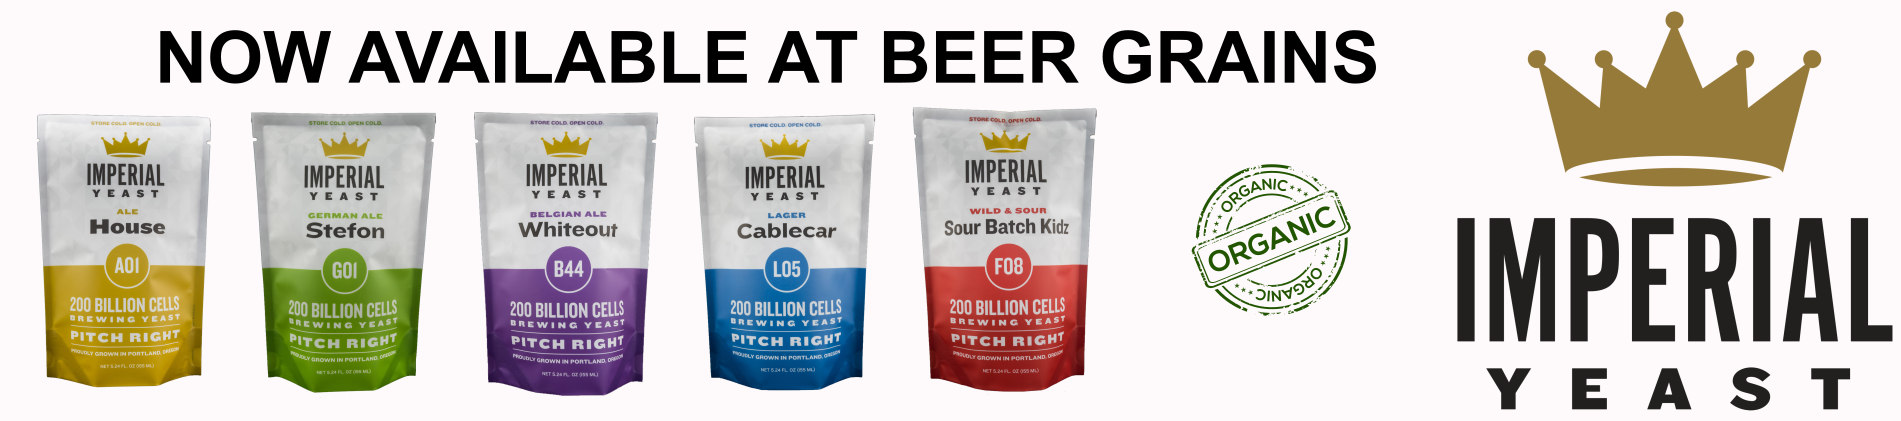 Imperial Yeast Banner